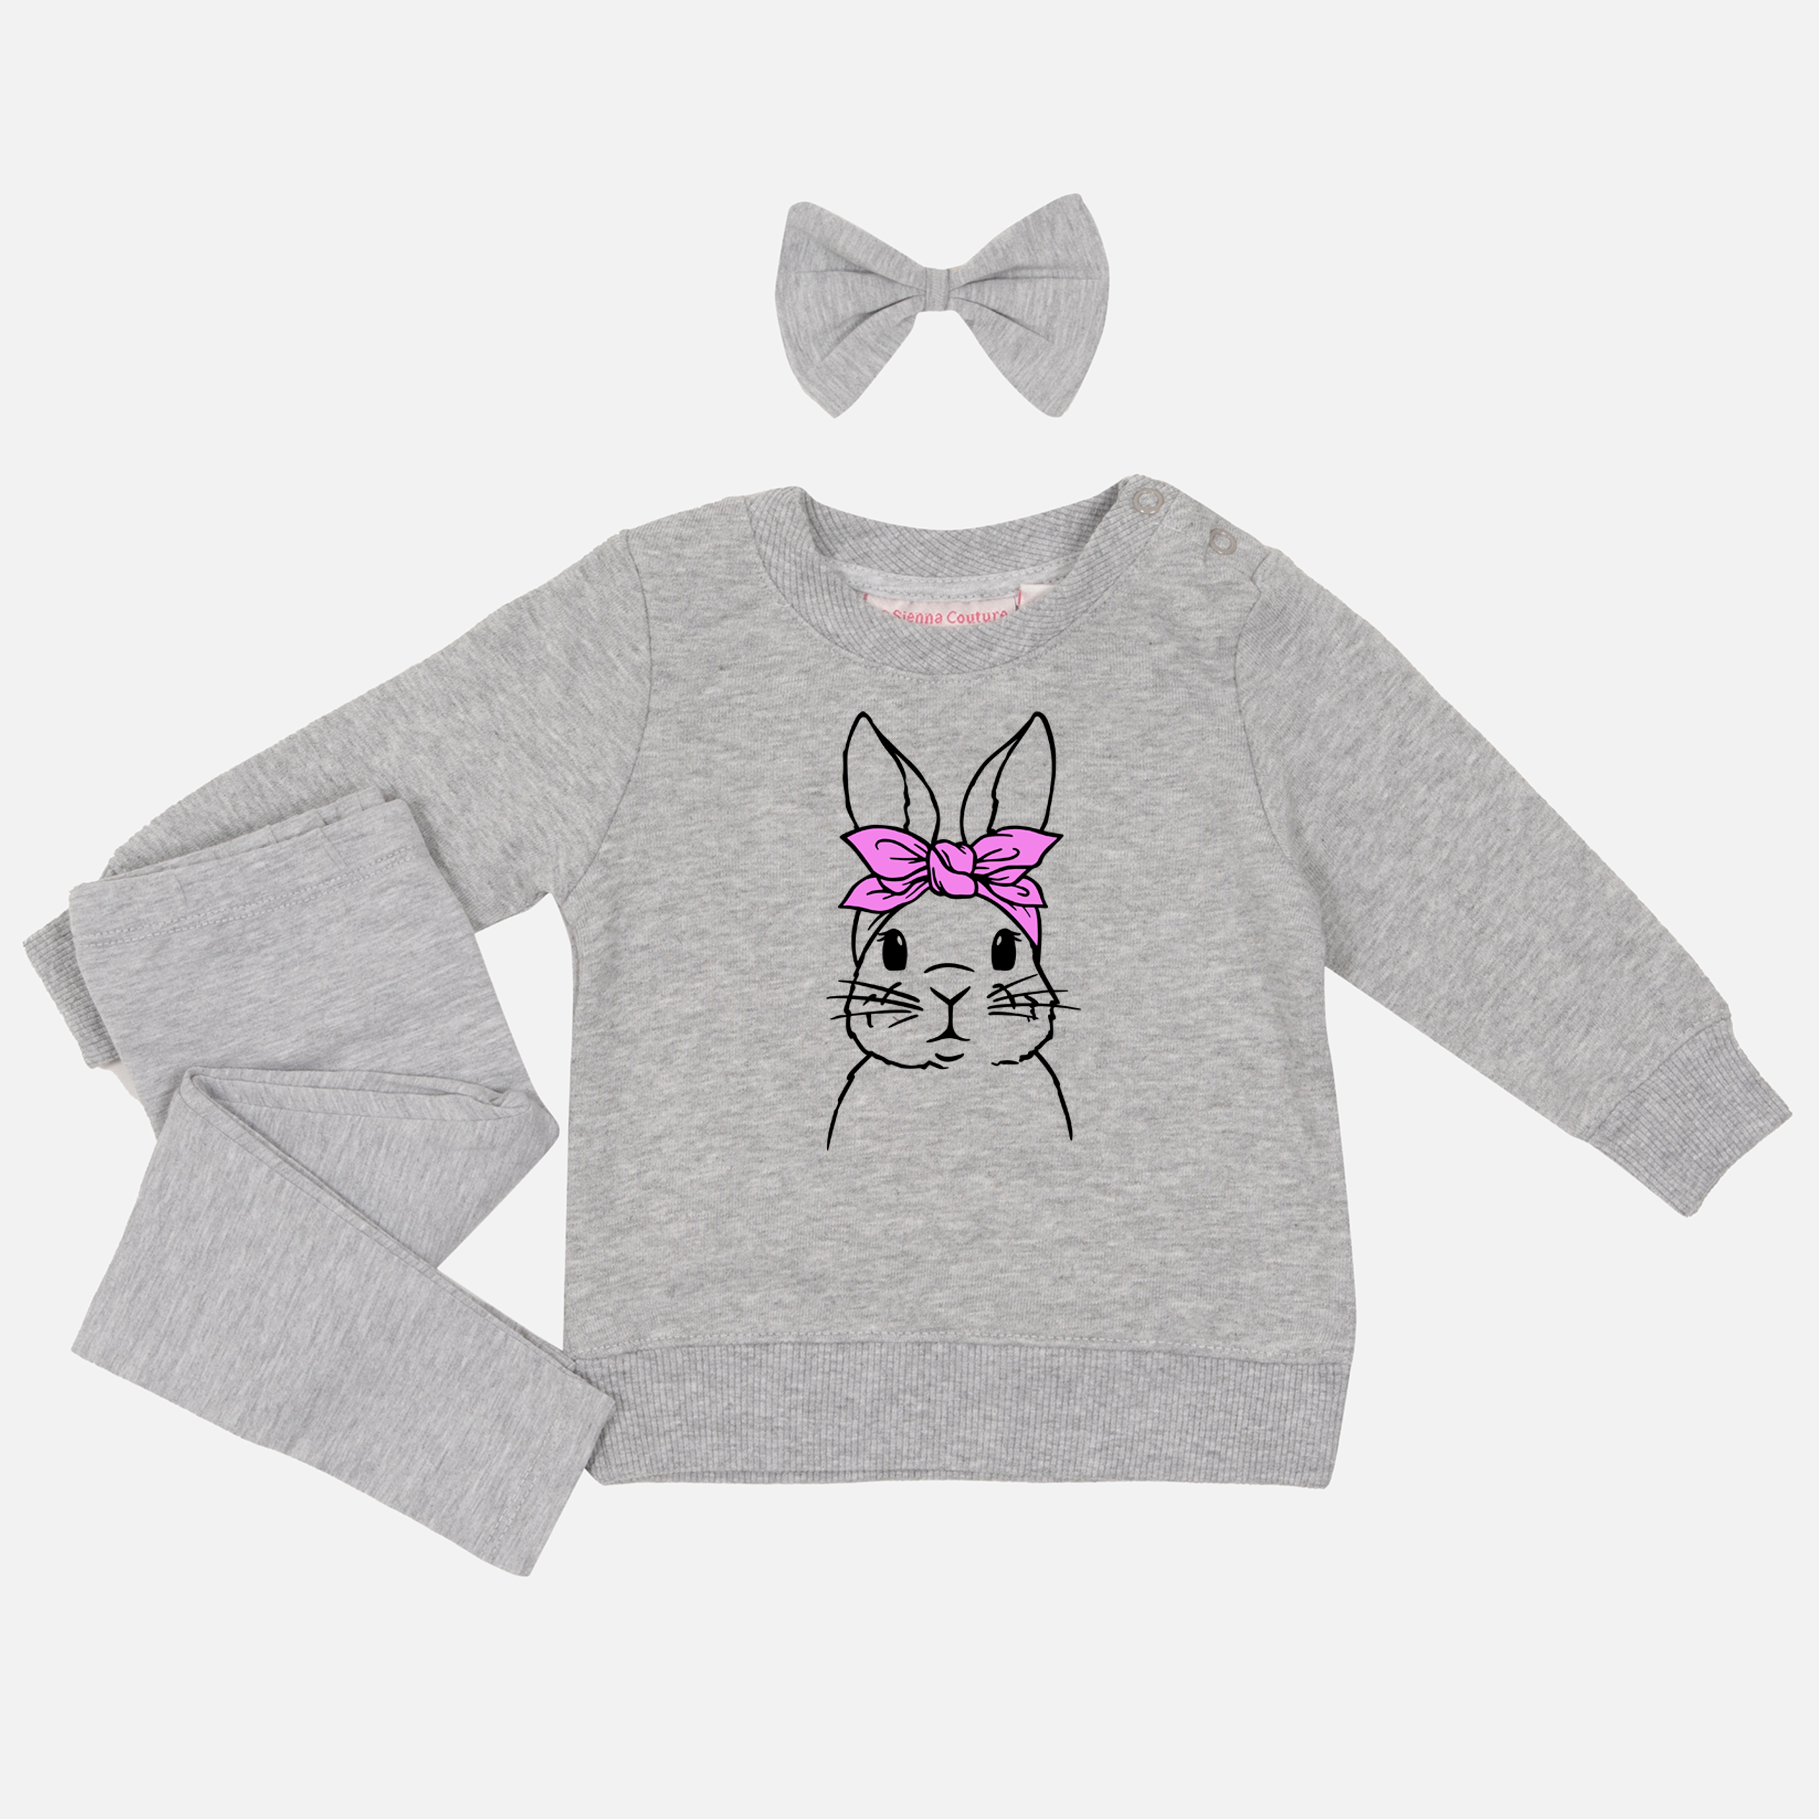 Easter Personalised Crew Neck - Bunny W/ Bow - Grey